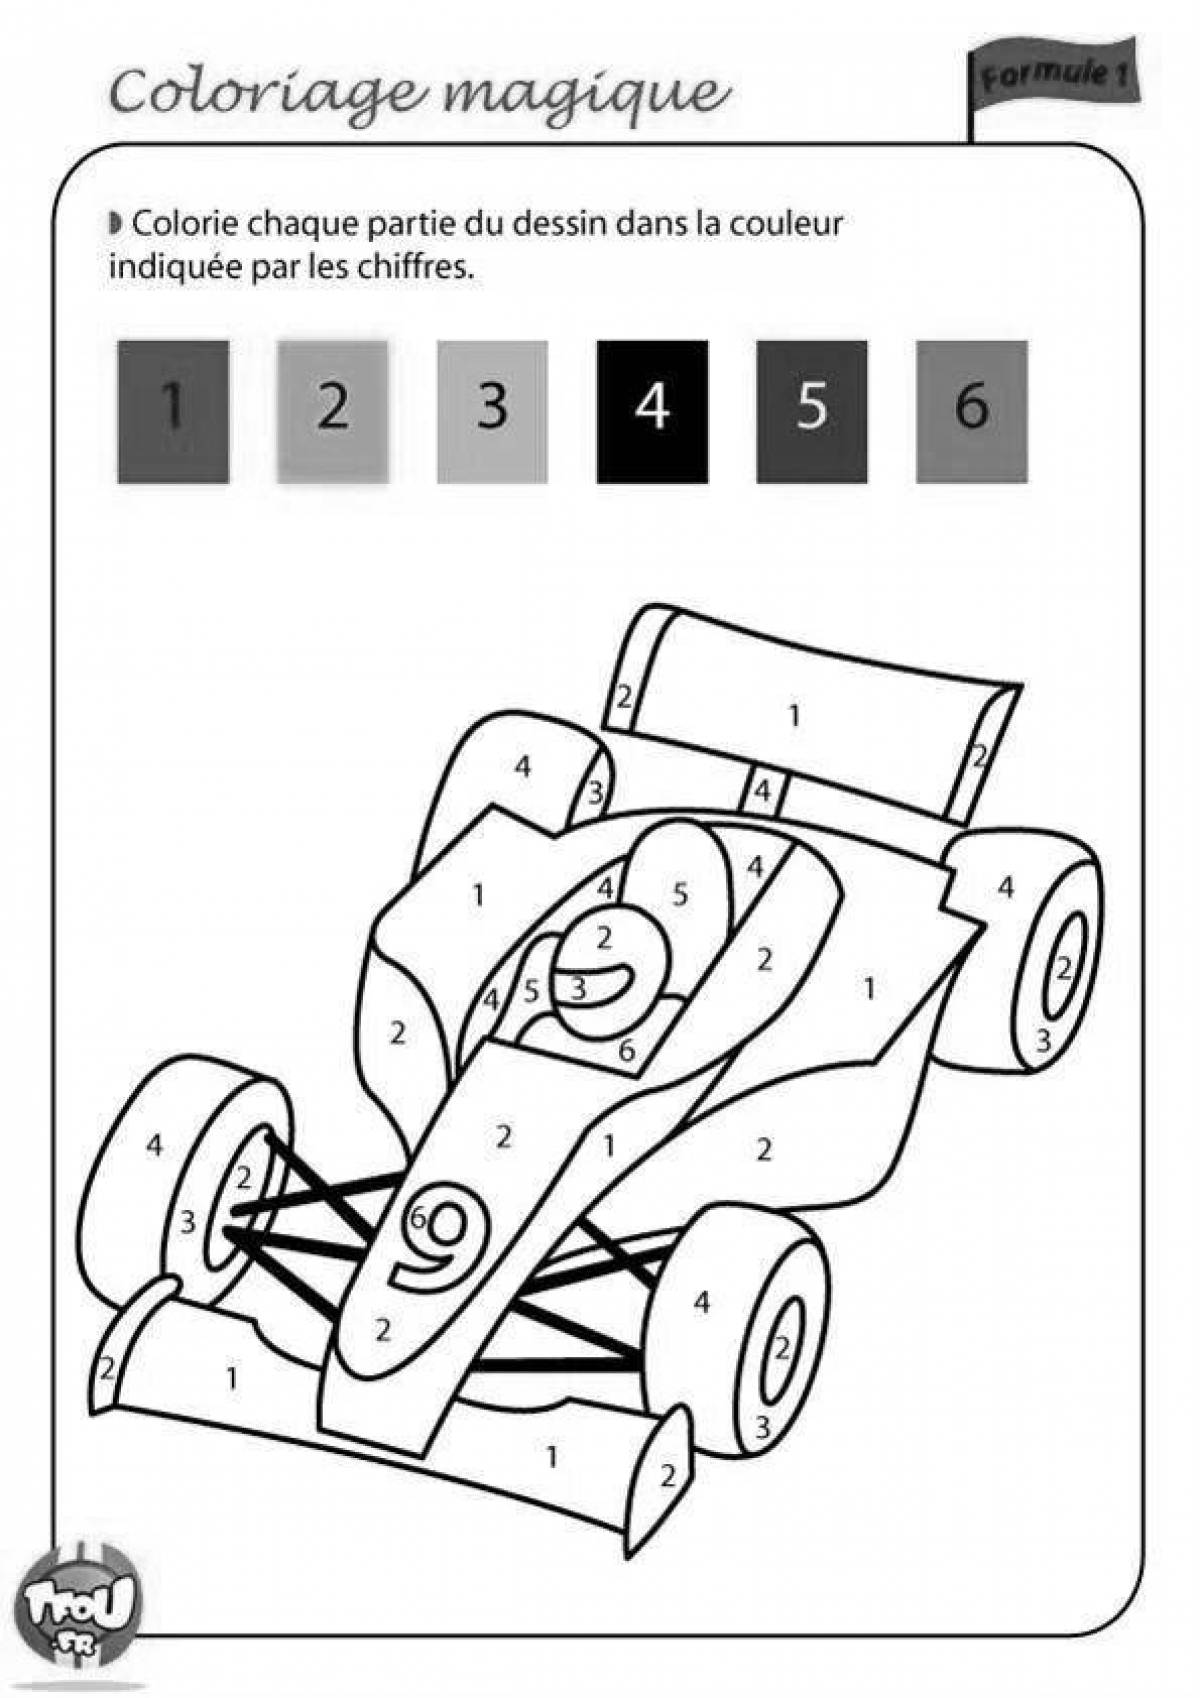 Colored explosive transport by numbers coloring book